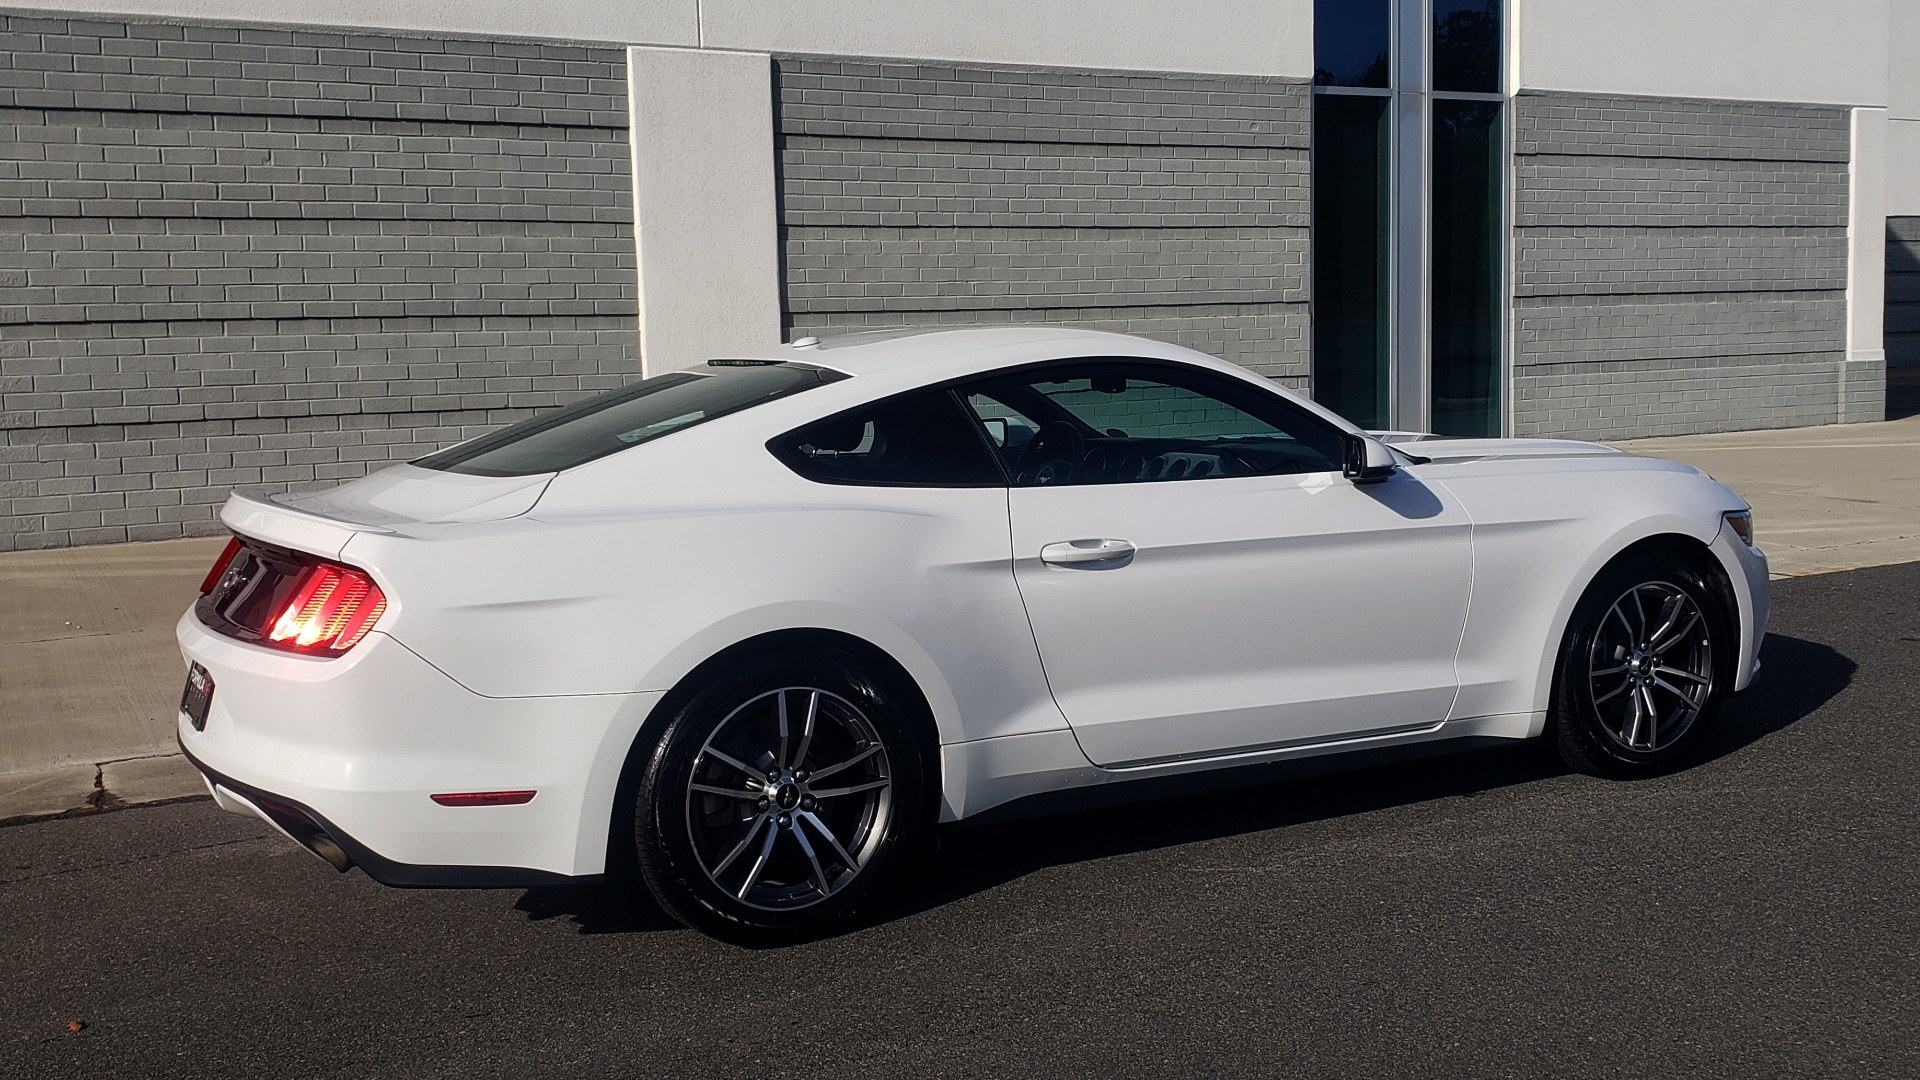 Used 2017 Ford MUSTANG PREMIUM COUPE 2.3L ECOBOOST / AUTO / 18-IN WHEELS / REARVIEW for sale Sold at Formula Imports in Charlotte NC 28227 7